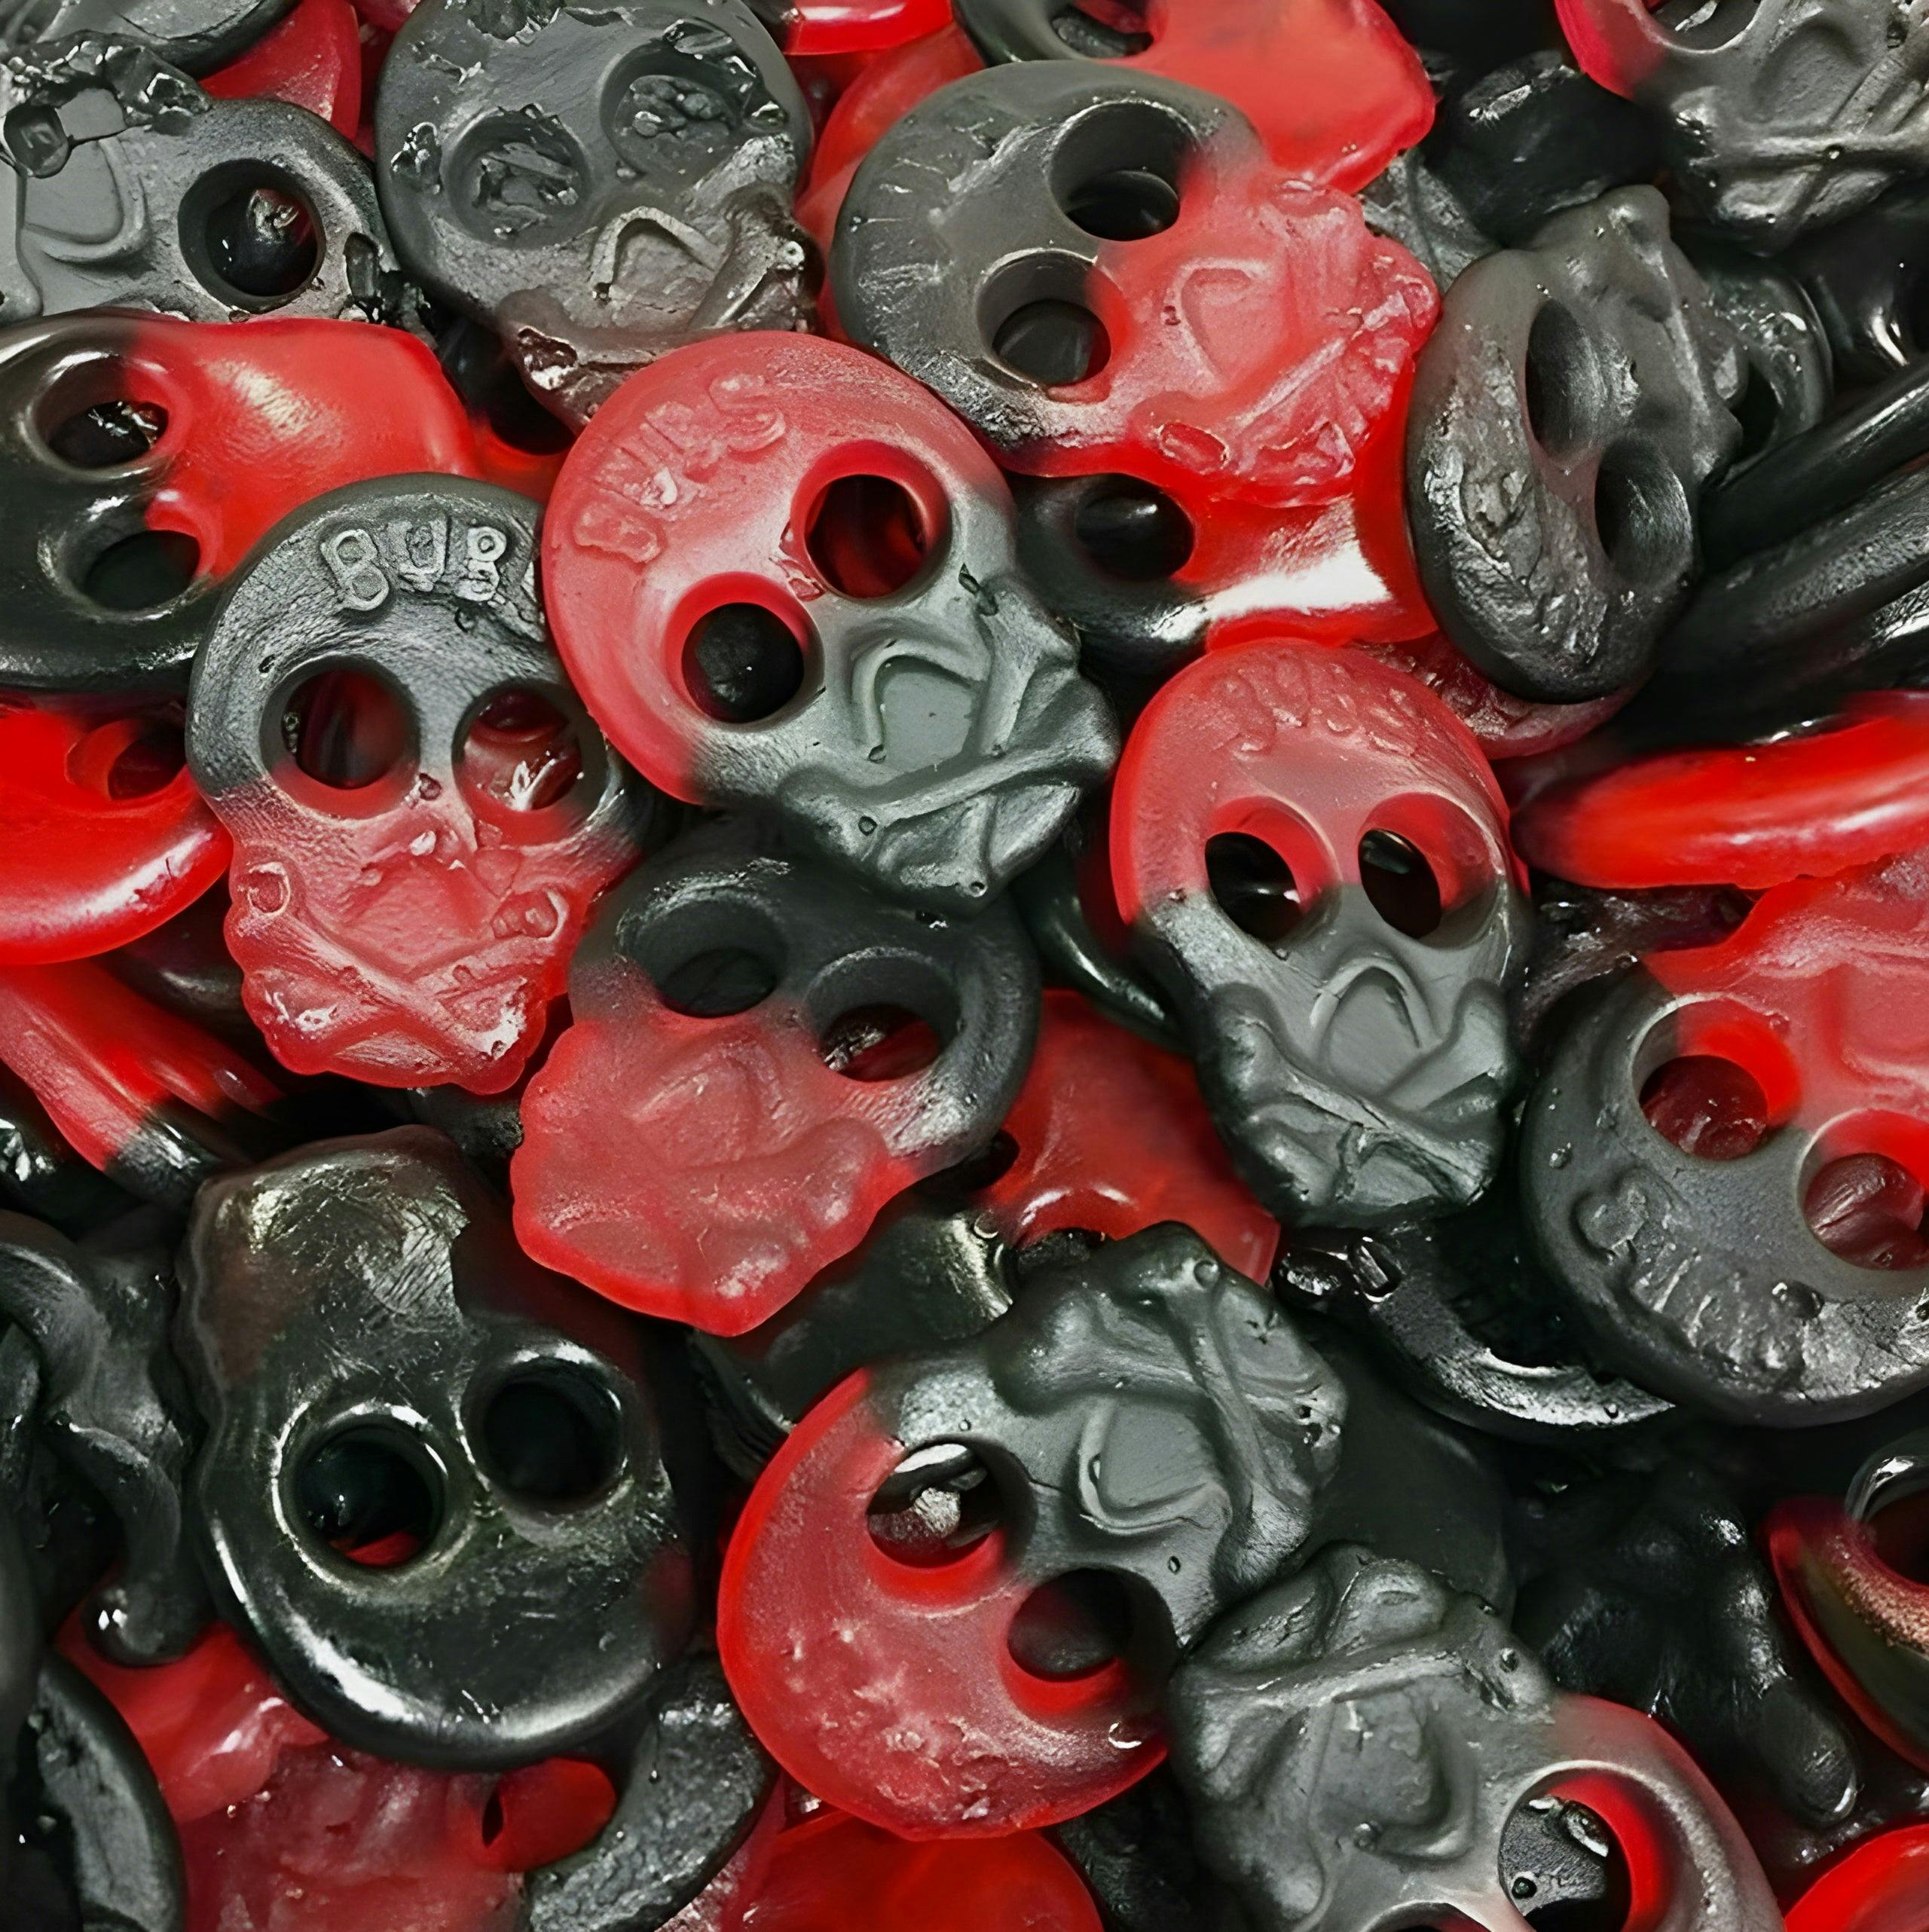 Swedish Candy manufacturer Bubs' modern classic, the incredible Raspberry and licorice skulls